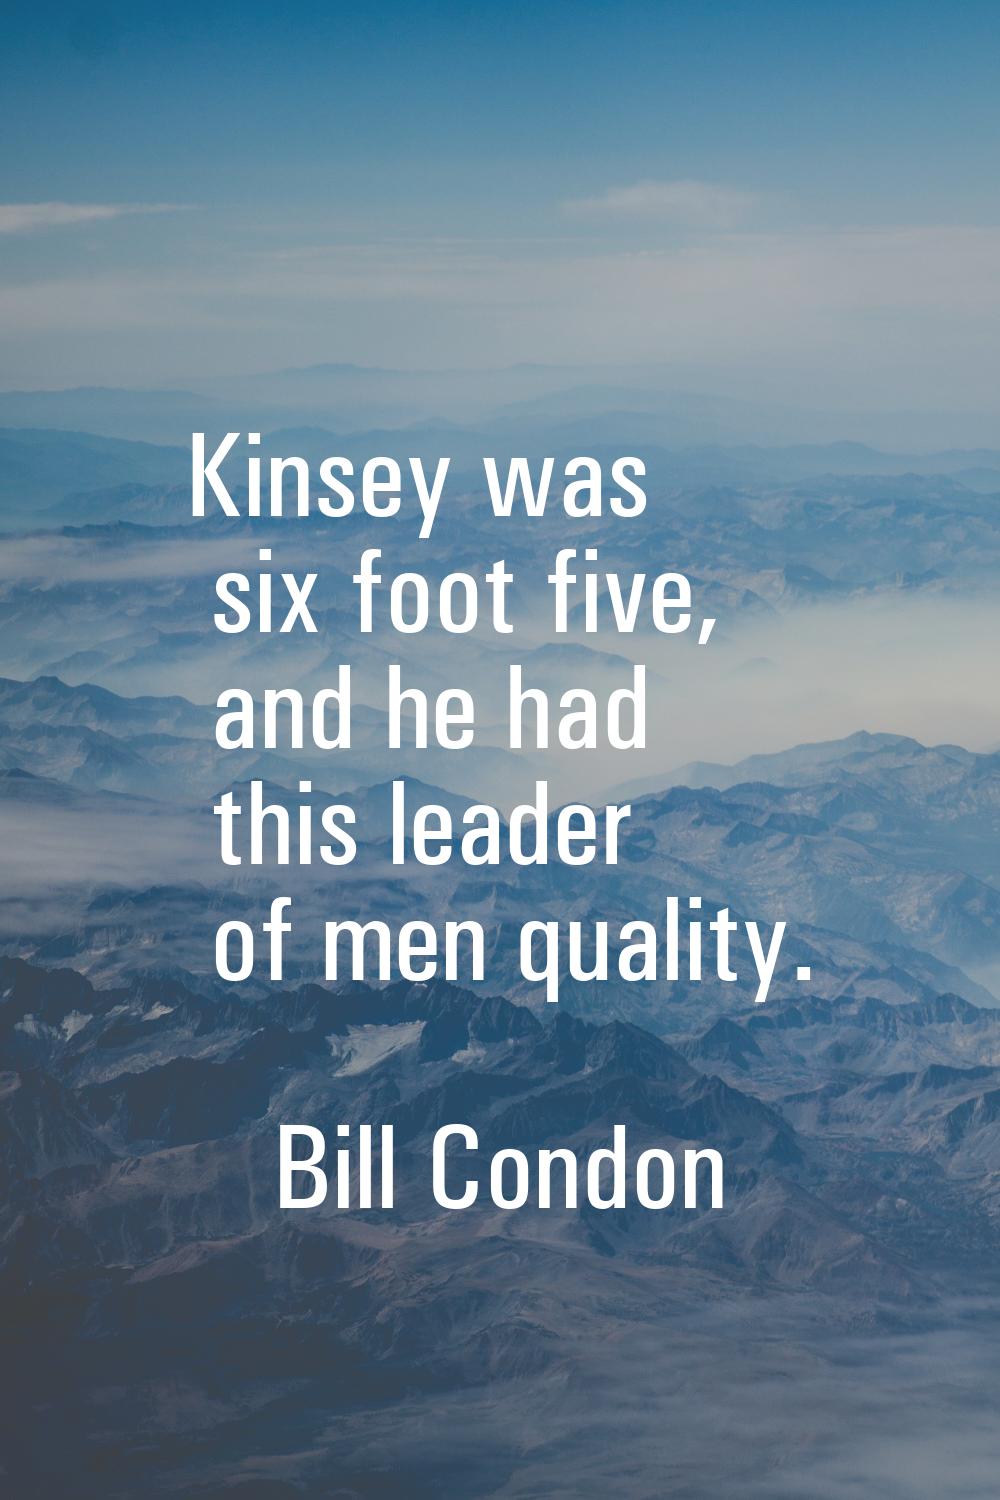 Kinsey was six foot five, and he had this leader of men quality.